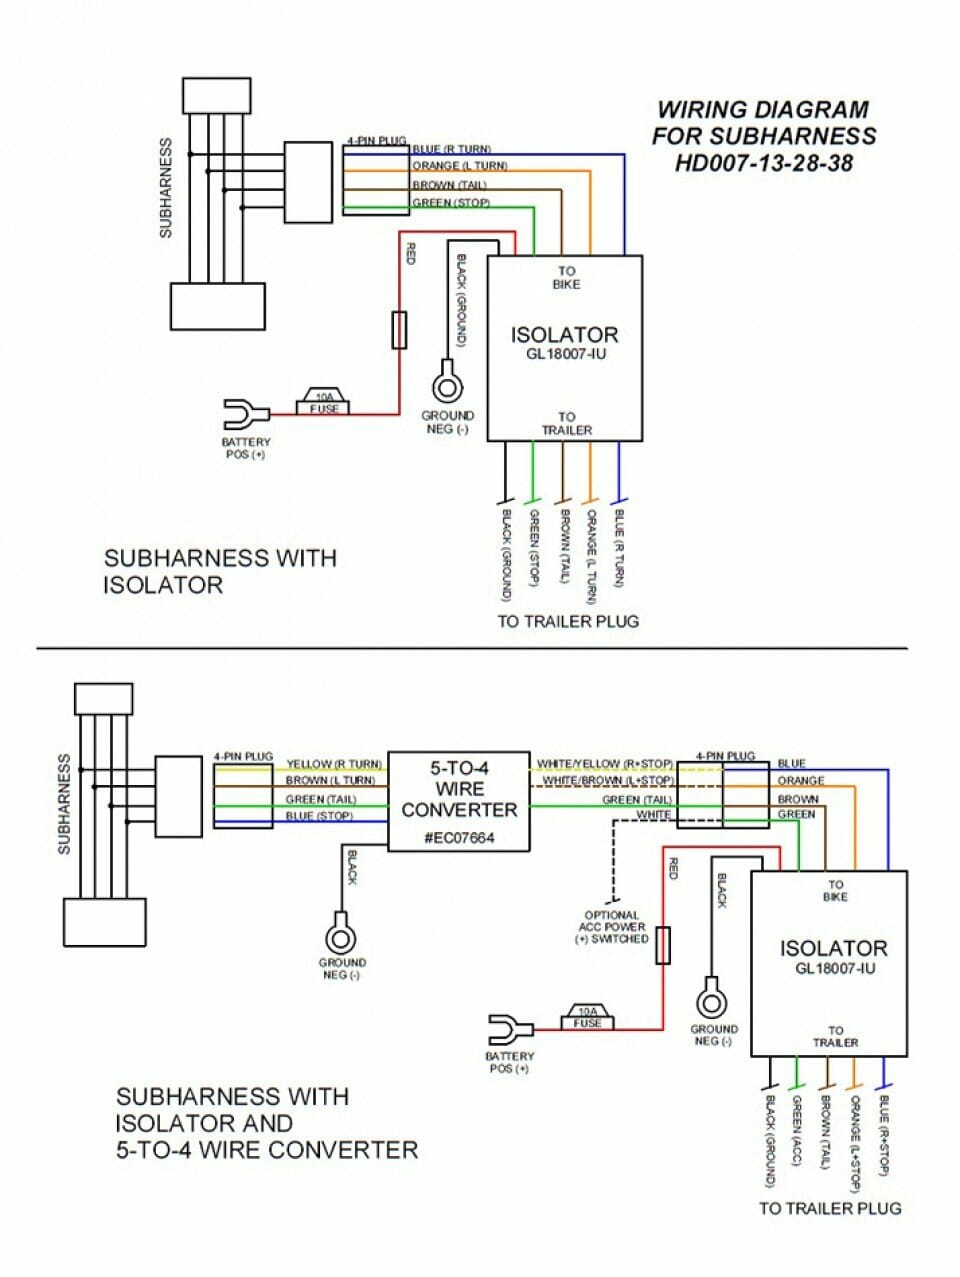 5 Wire Motorcycle Trailer Wiring Diagram from www.rivcoproducts.com